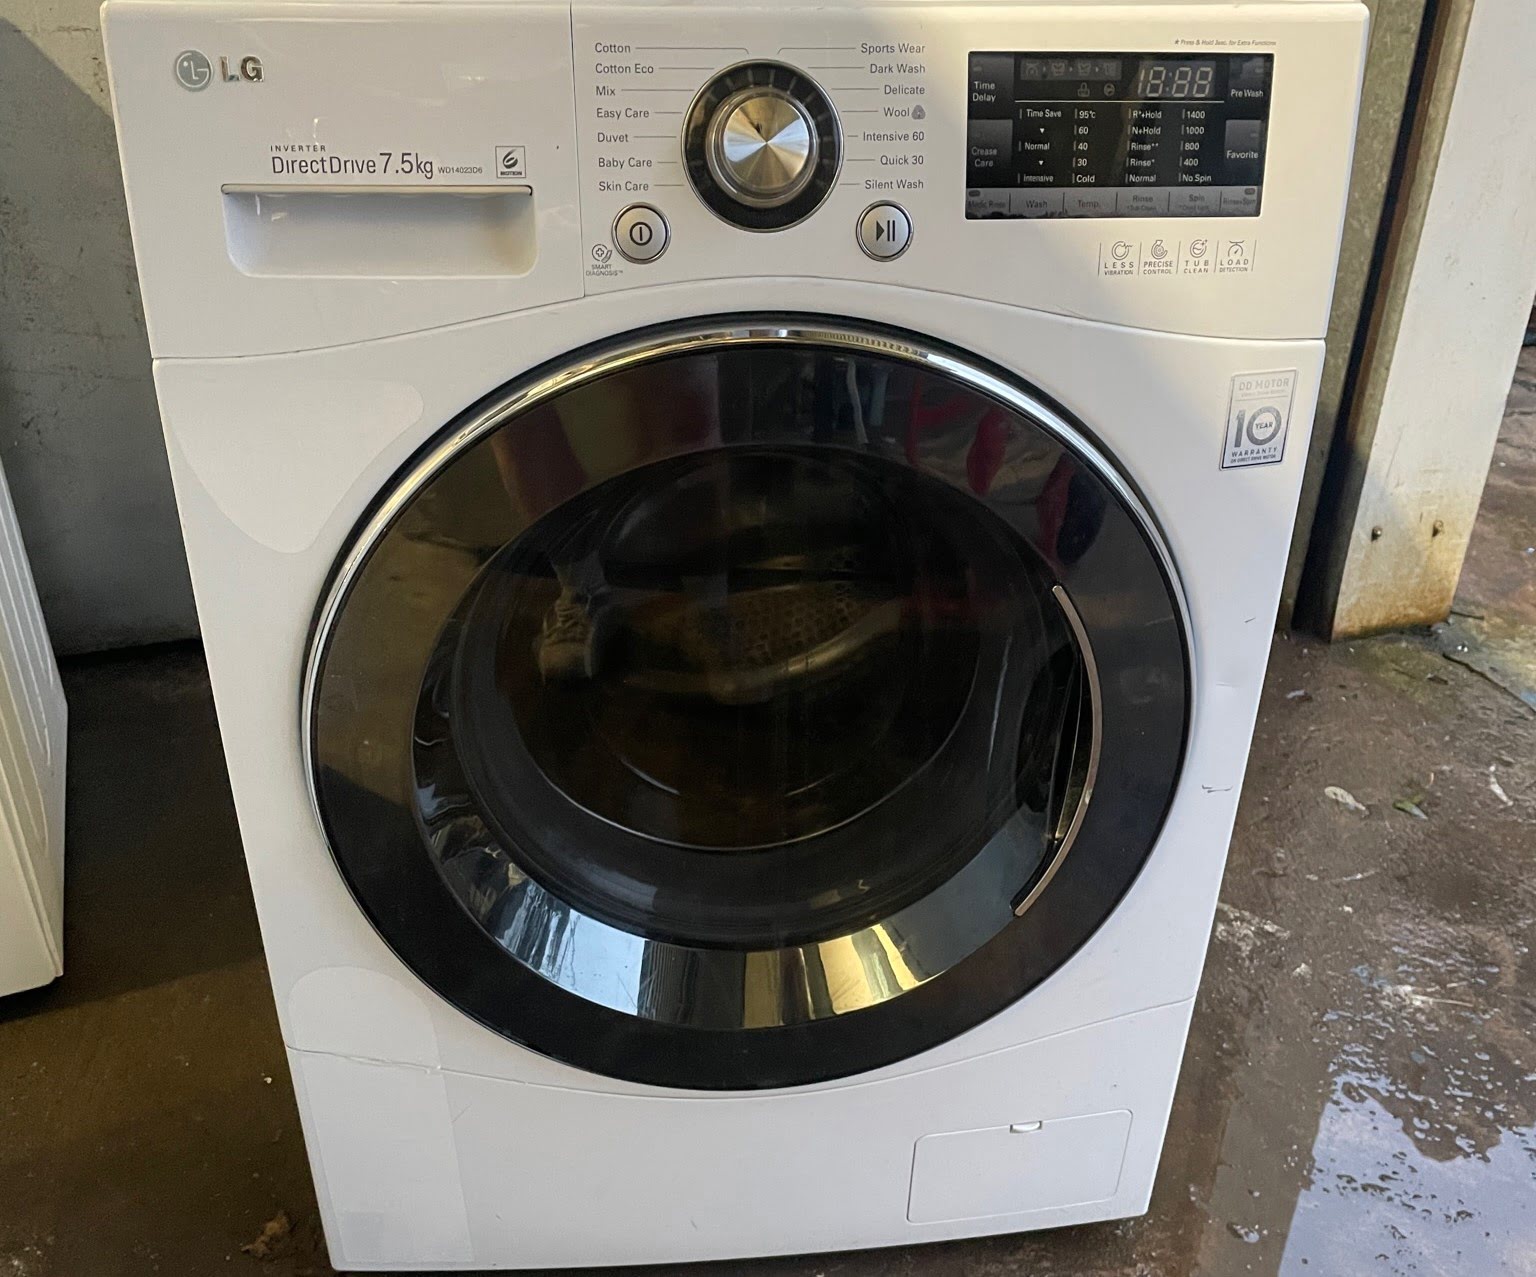 How To Fix The Error Code FF For LG Washing Machine